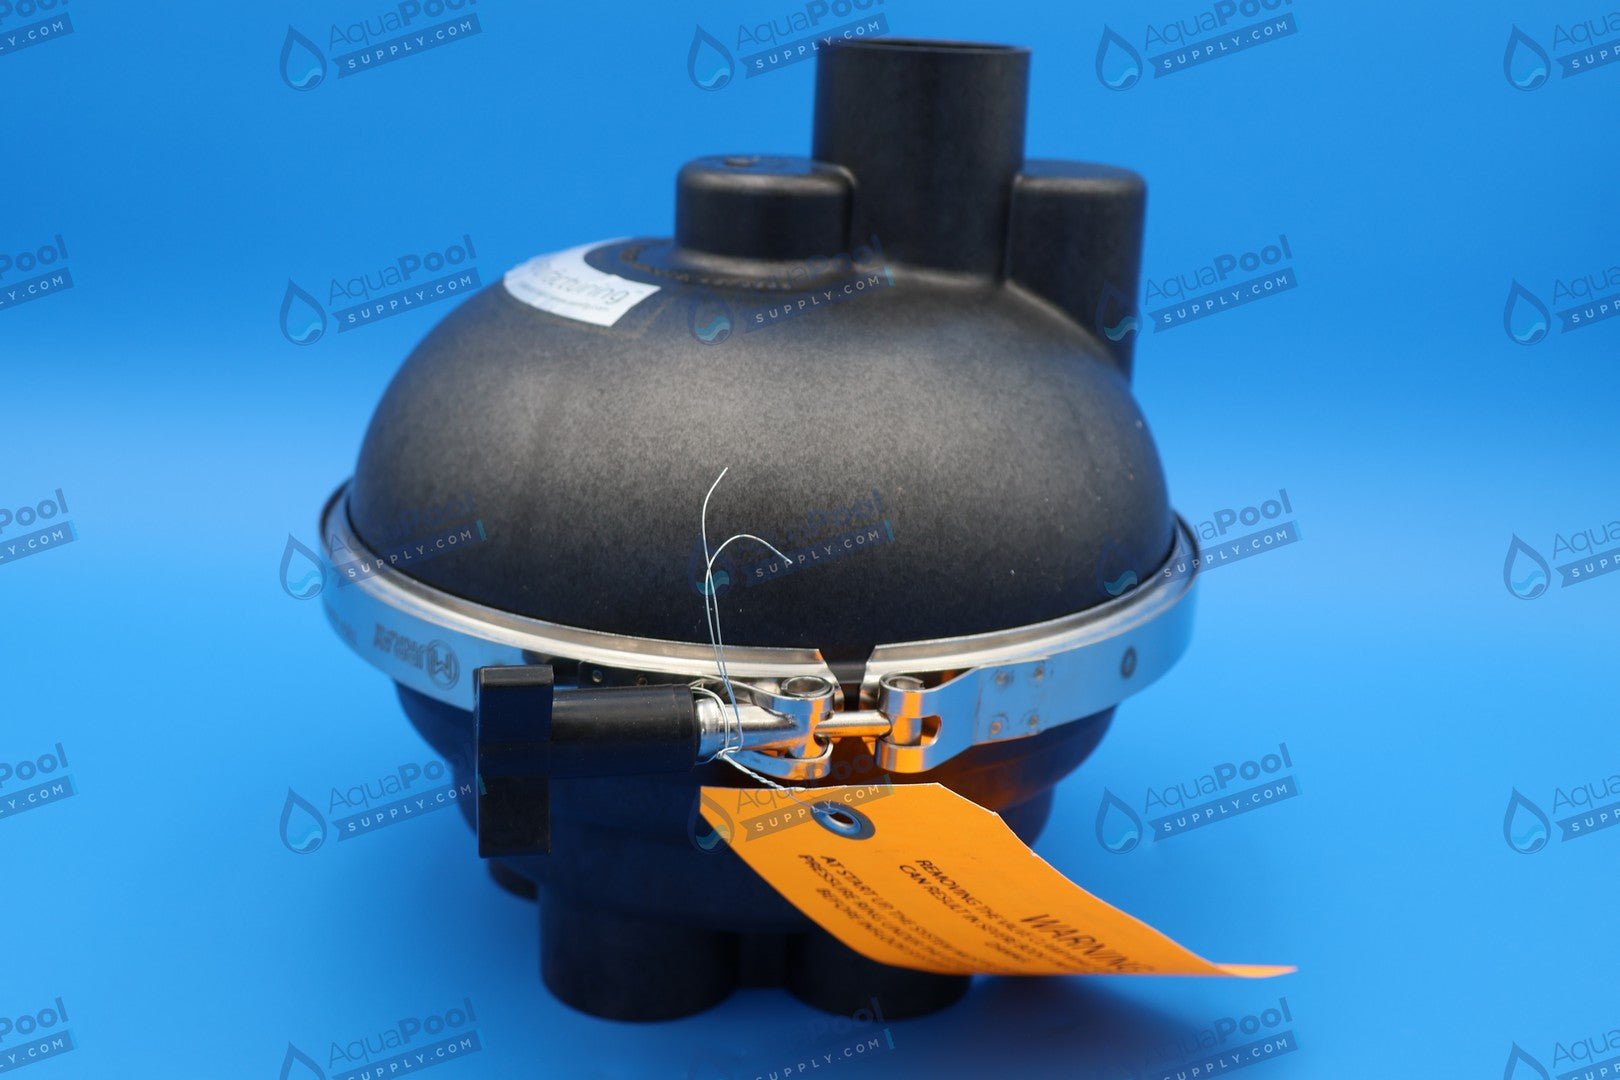 Pentair In-Floor (A&A) Top Feed Complete 1.5" 5 Port Valve without QuikStop 225571 522896 - Pop-Up Valves